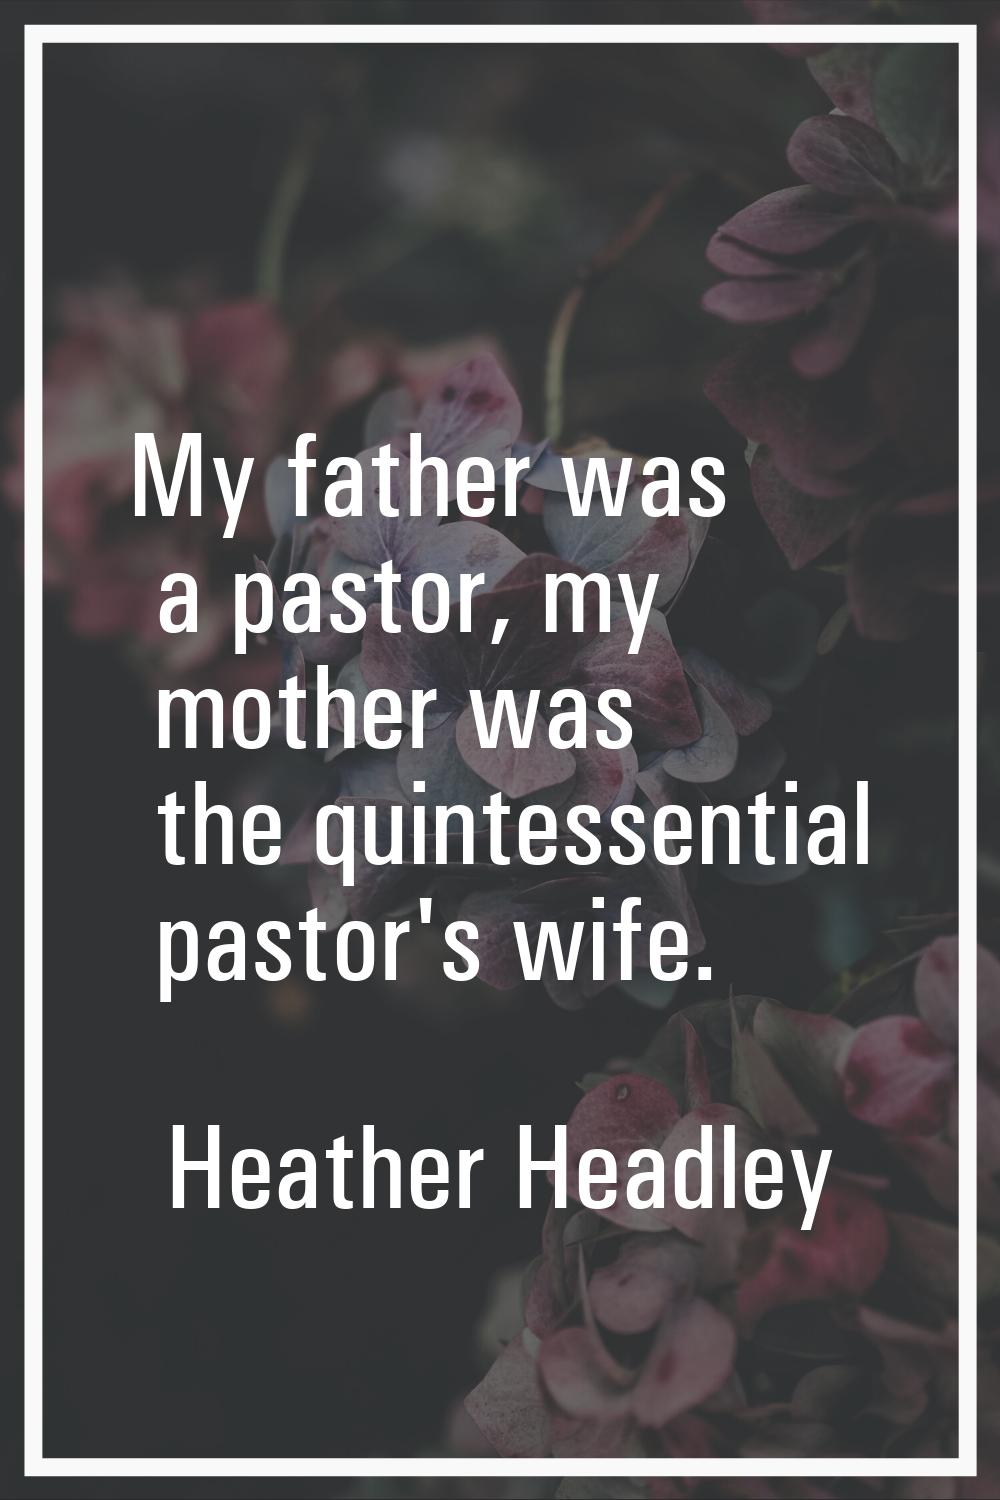 My father was a pastor, my mother was the quintessential pastor's wife.